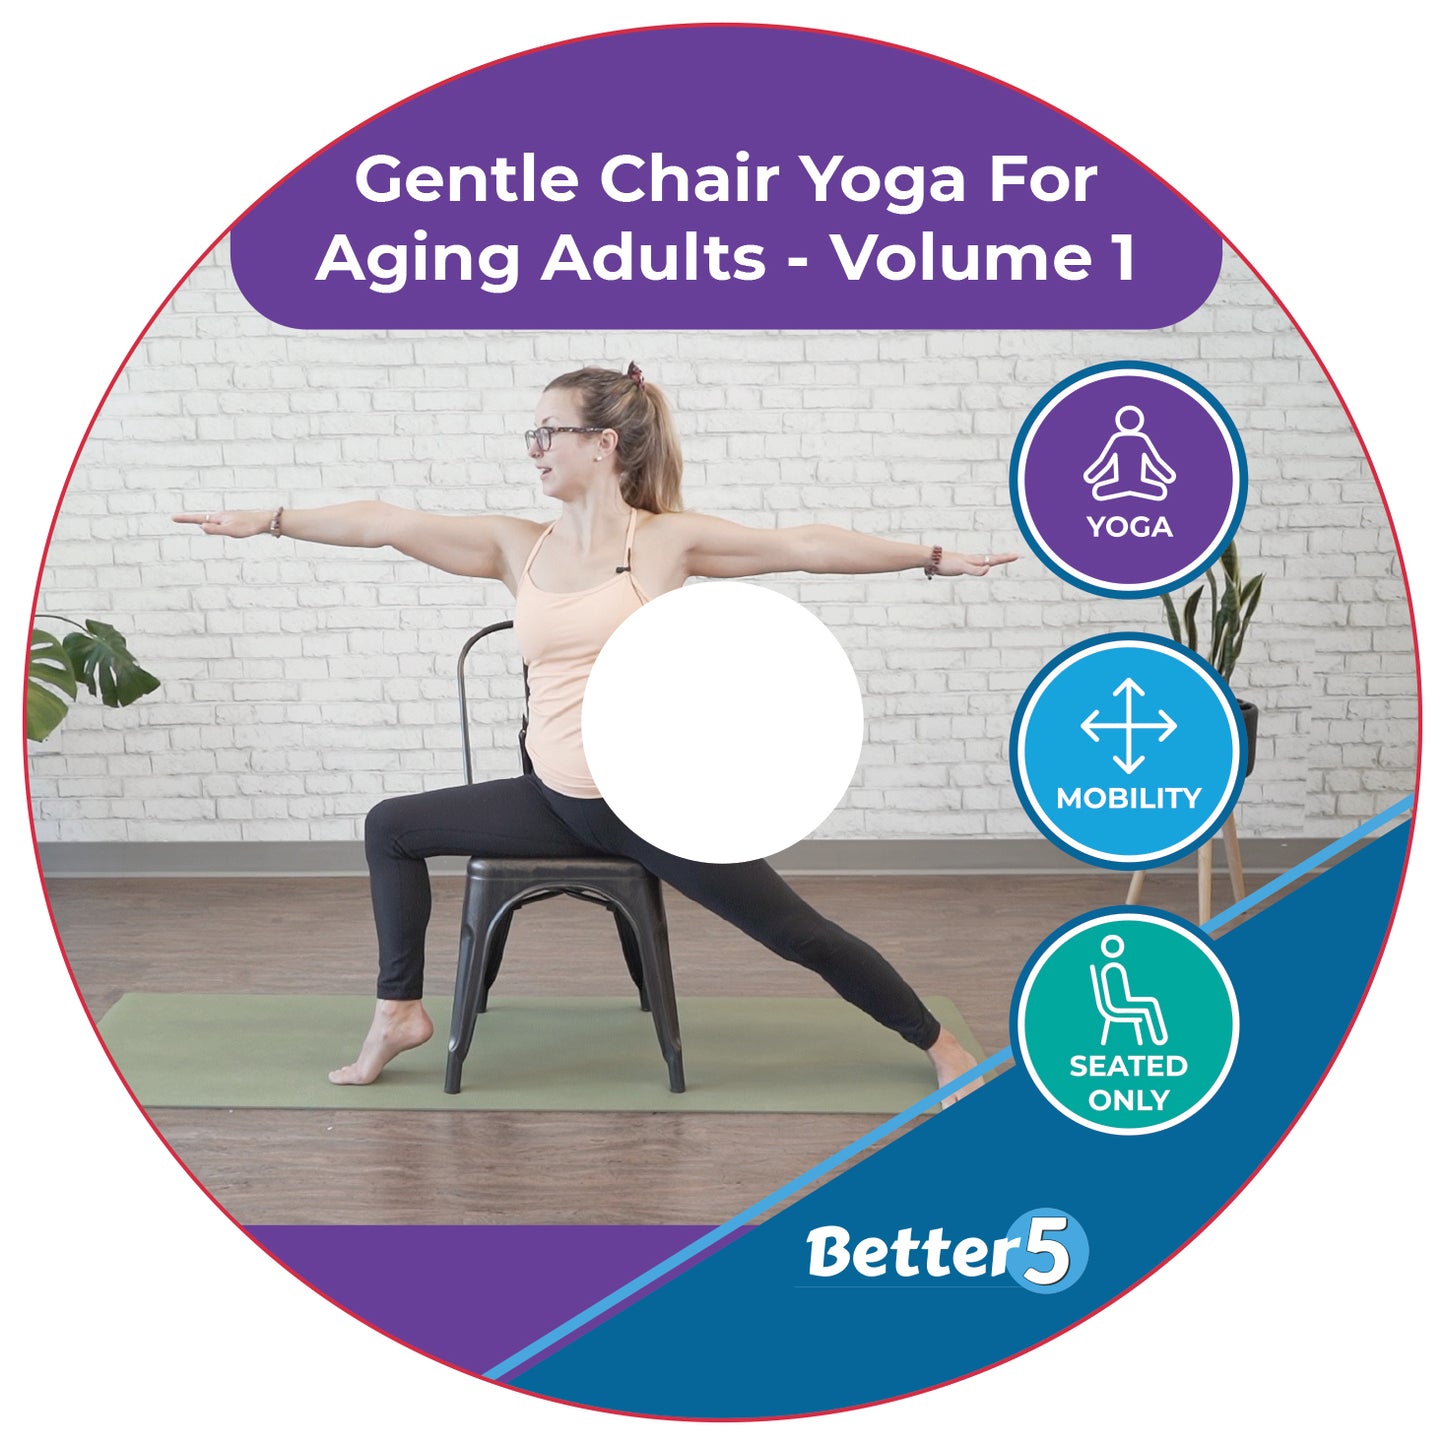 Gentle Chair Yoga For Aging Adults - Volume 1 DVD